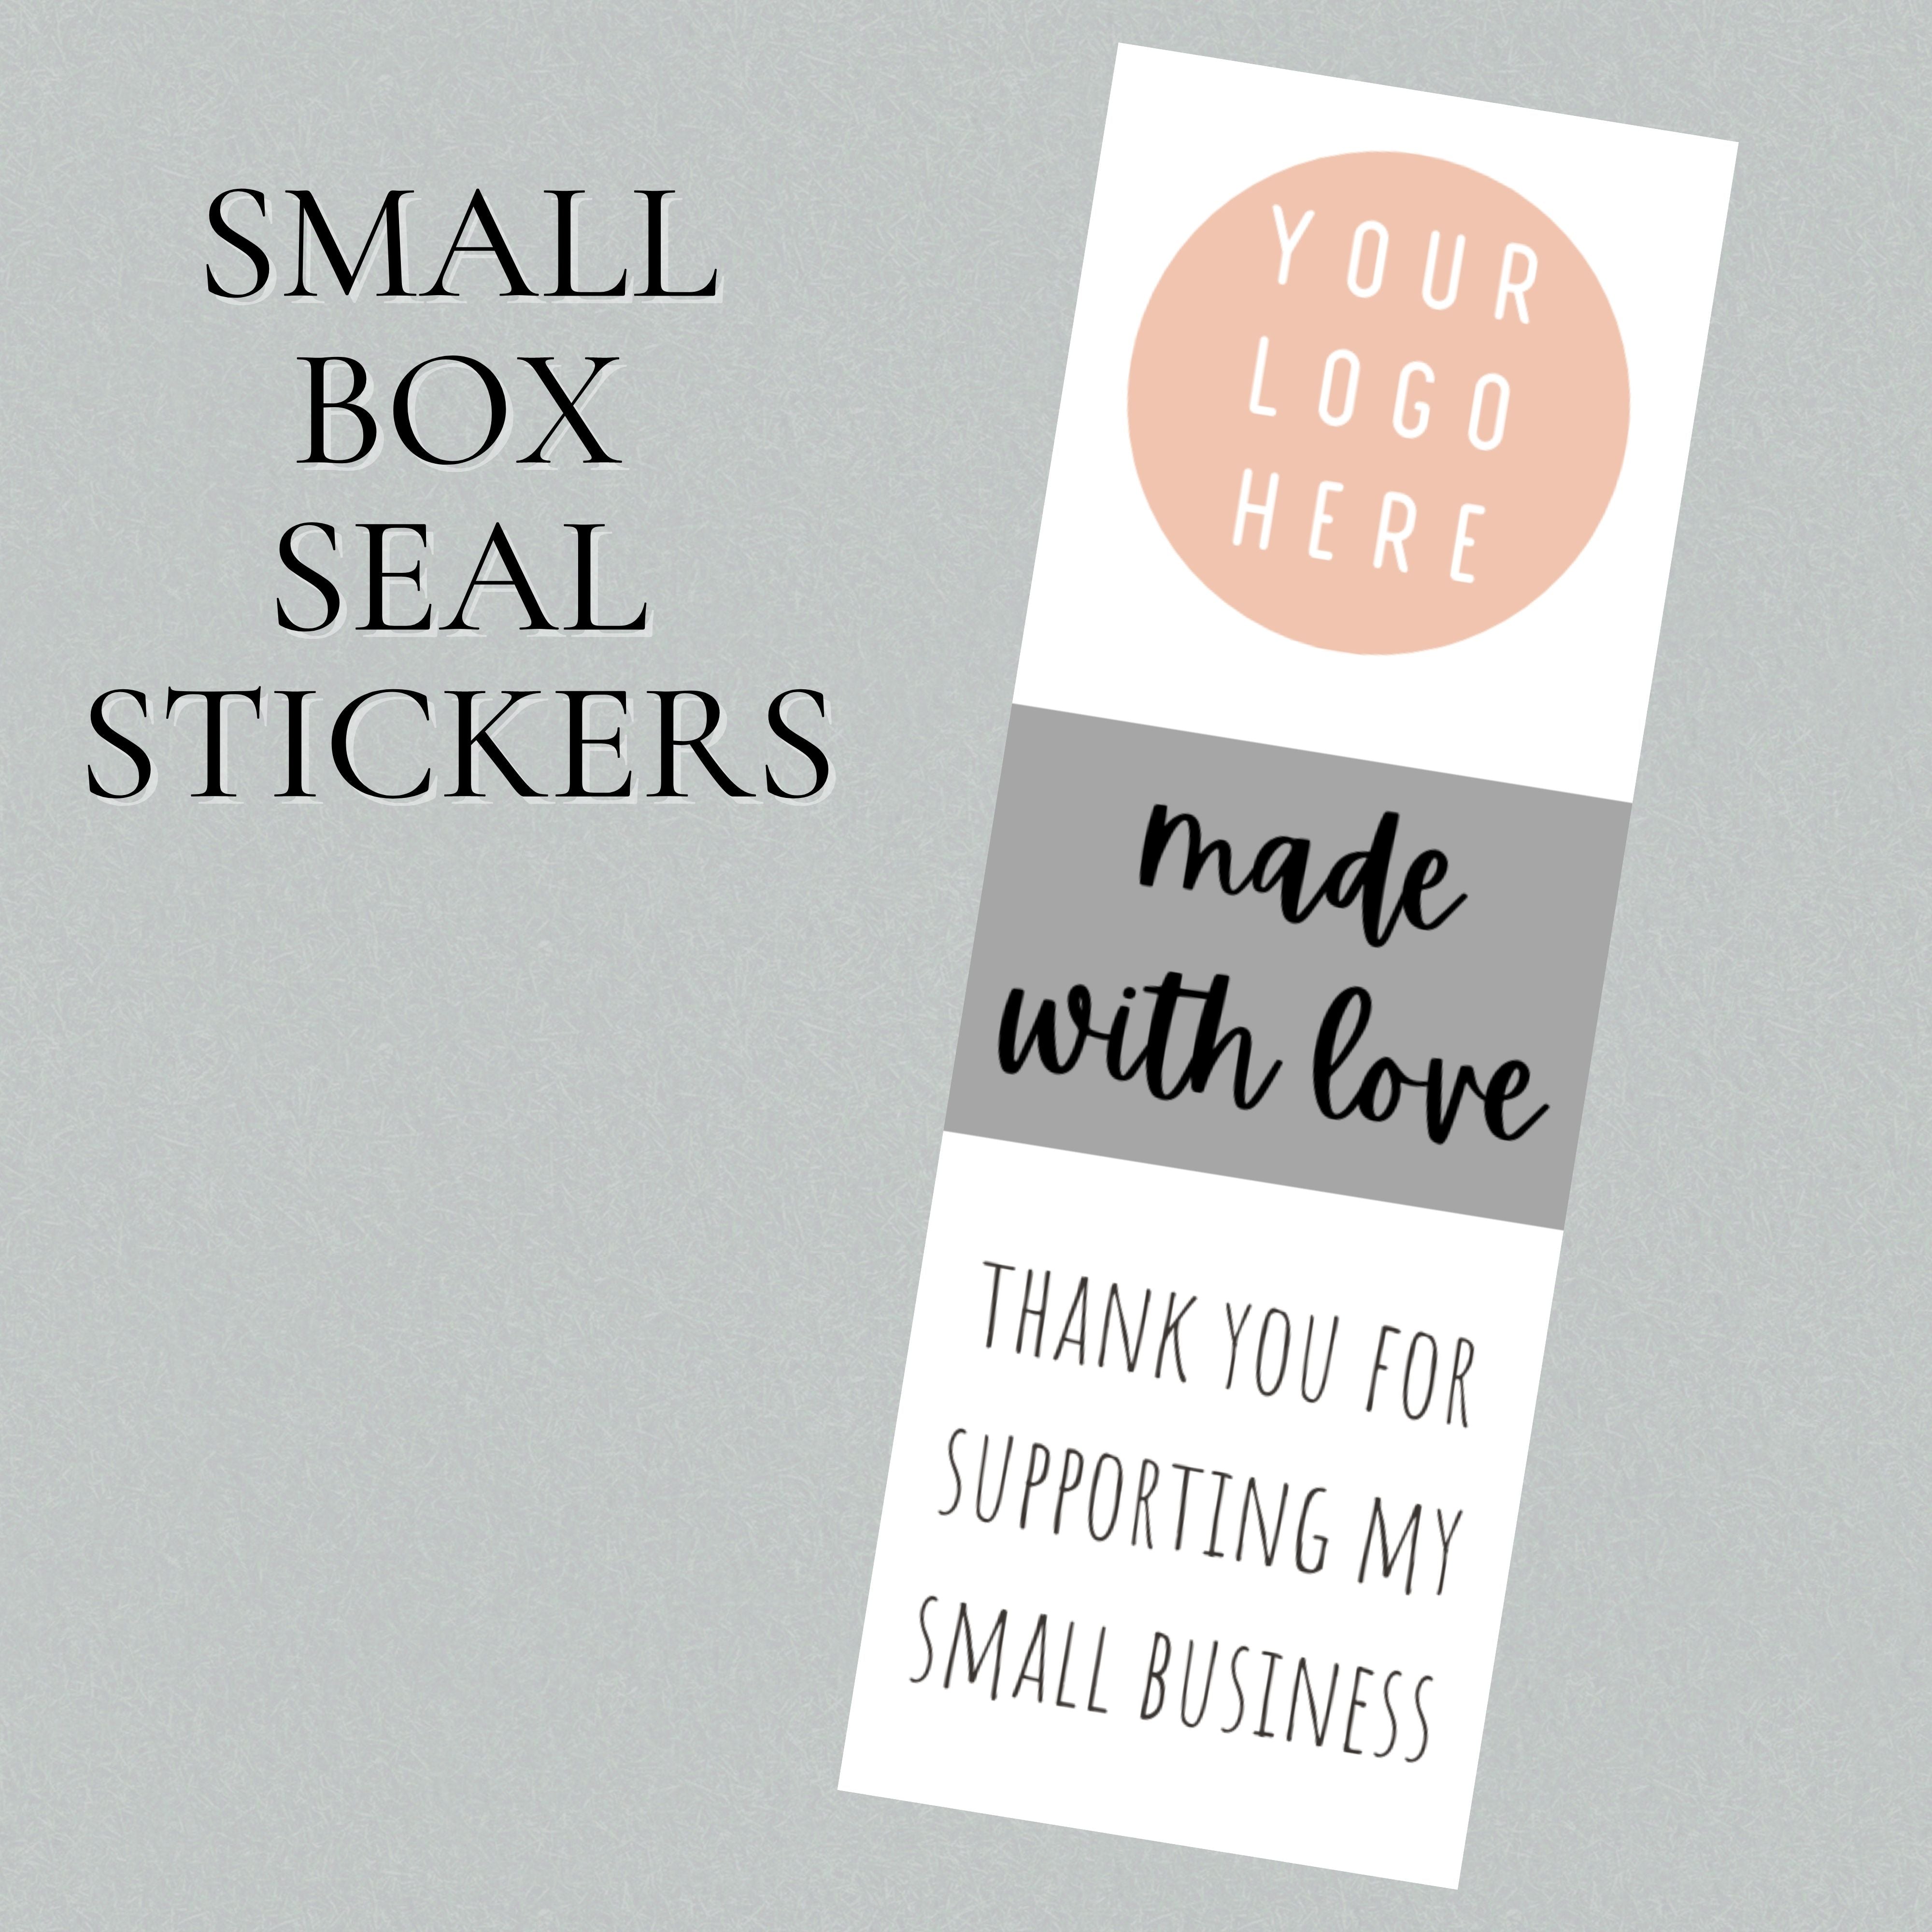 Small Box Seals - made with love